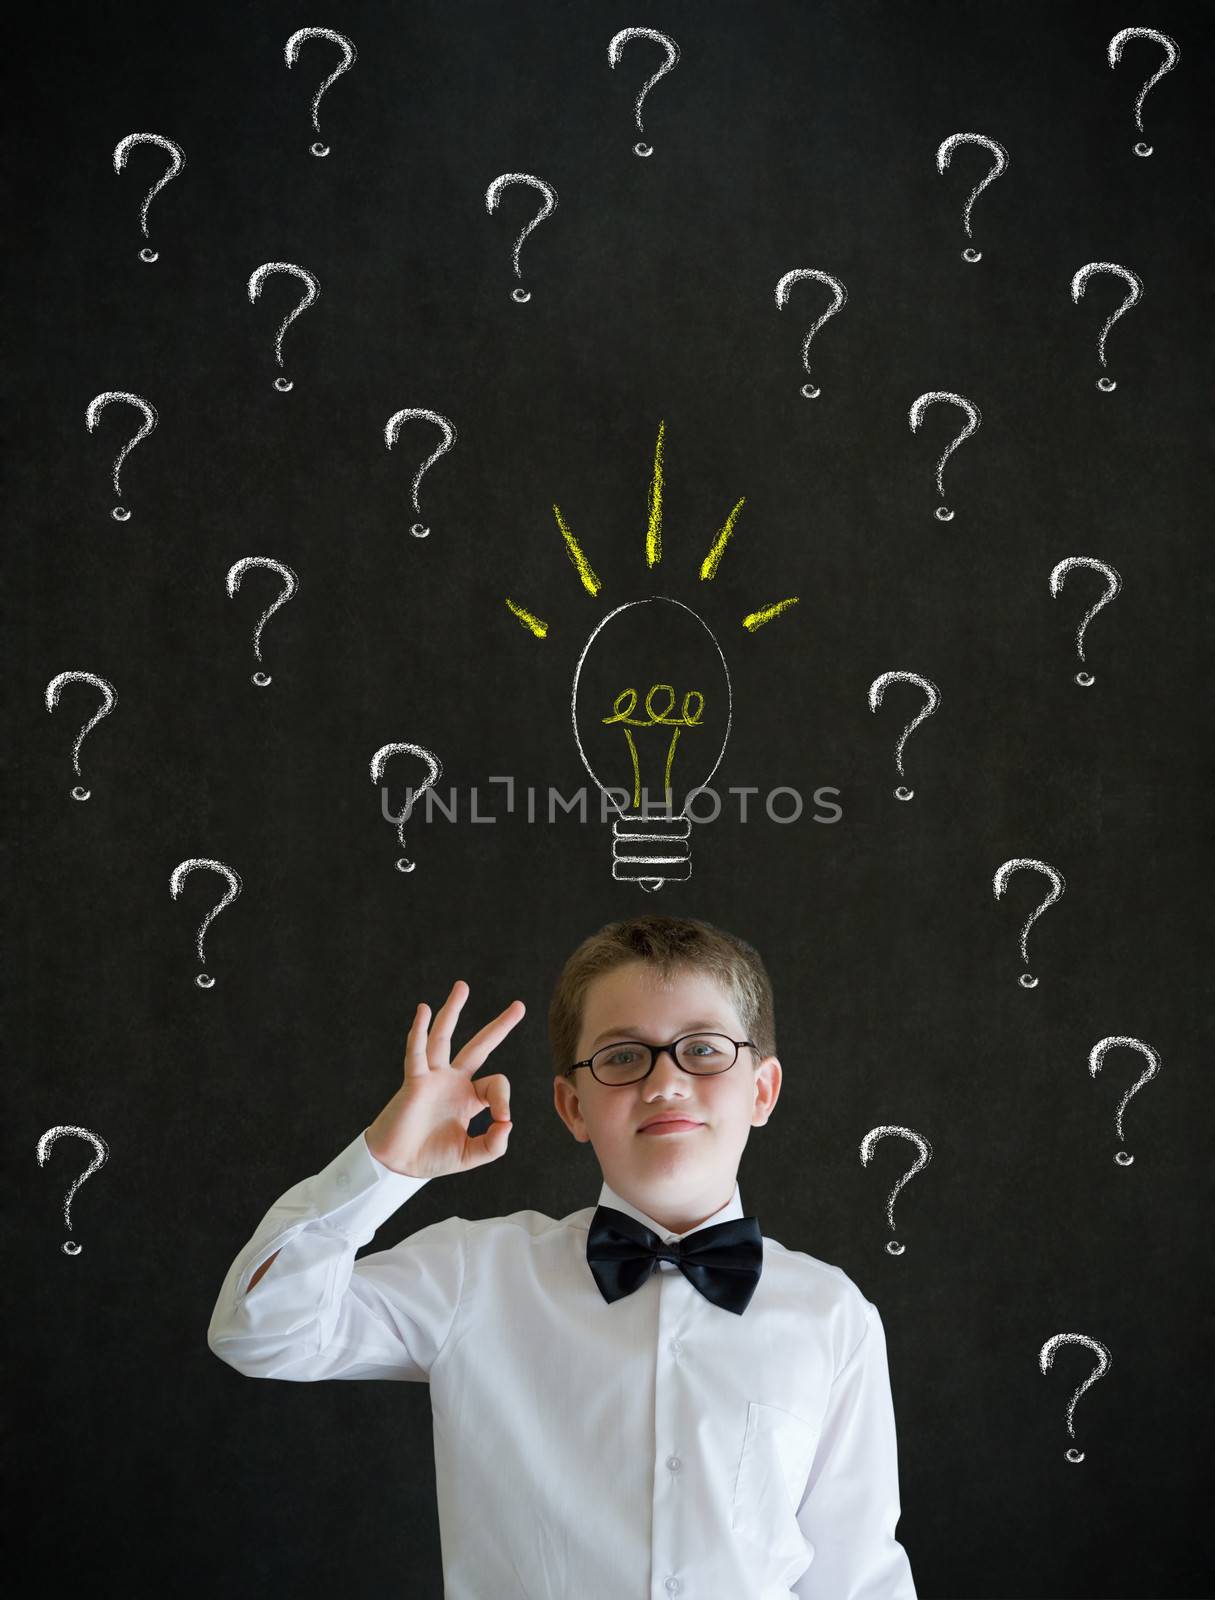 All ok or okay sign dressed up as business man questioning ideas on blackboard background